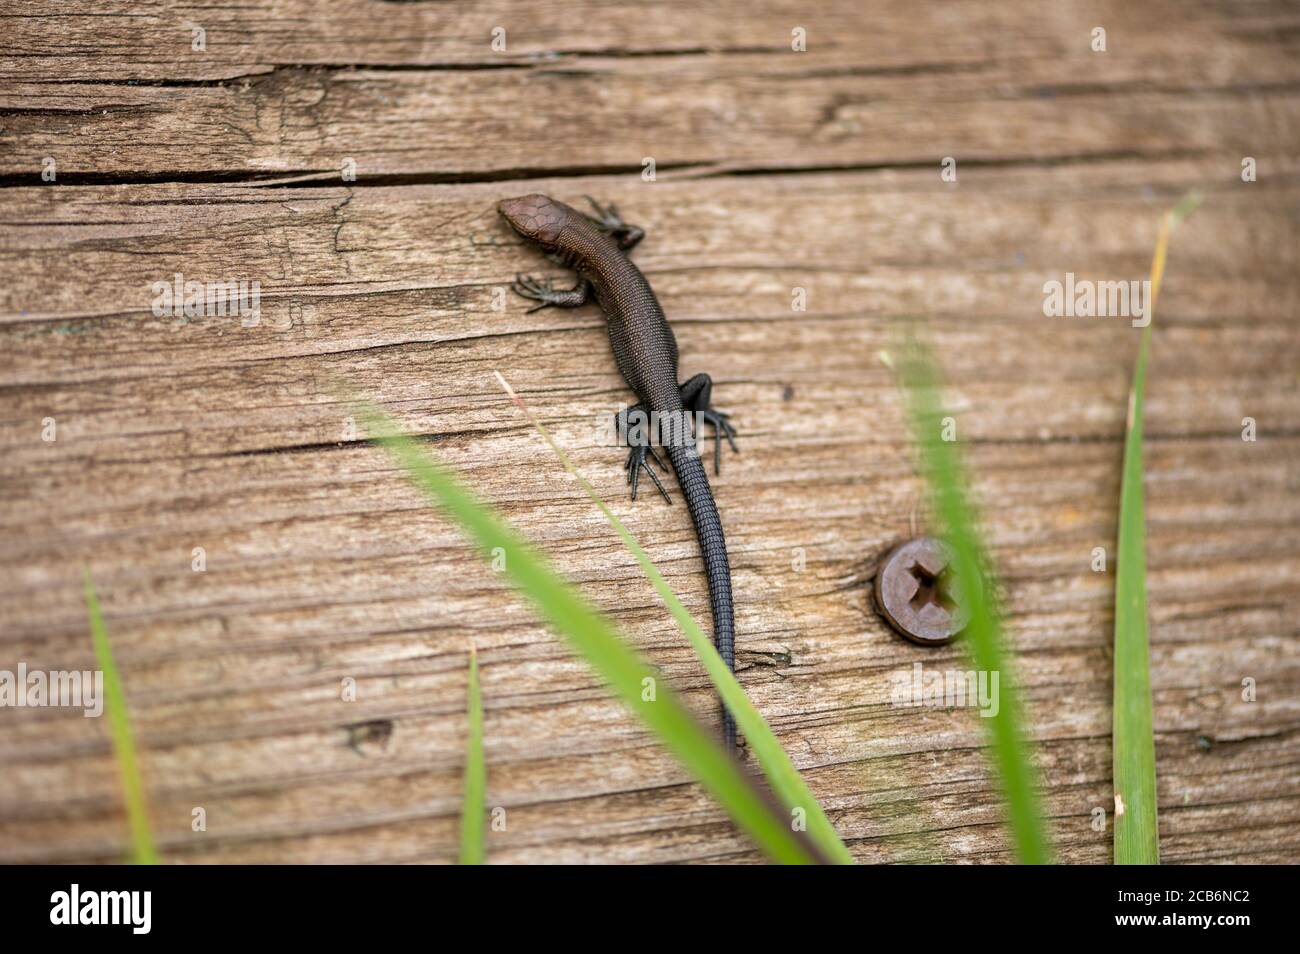 A small black lizard is warming itself on an old Board. Close up Stock Photo